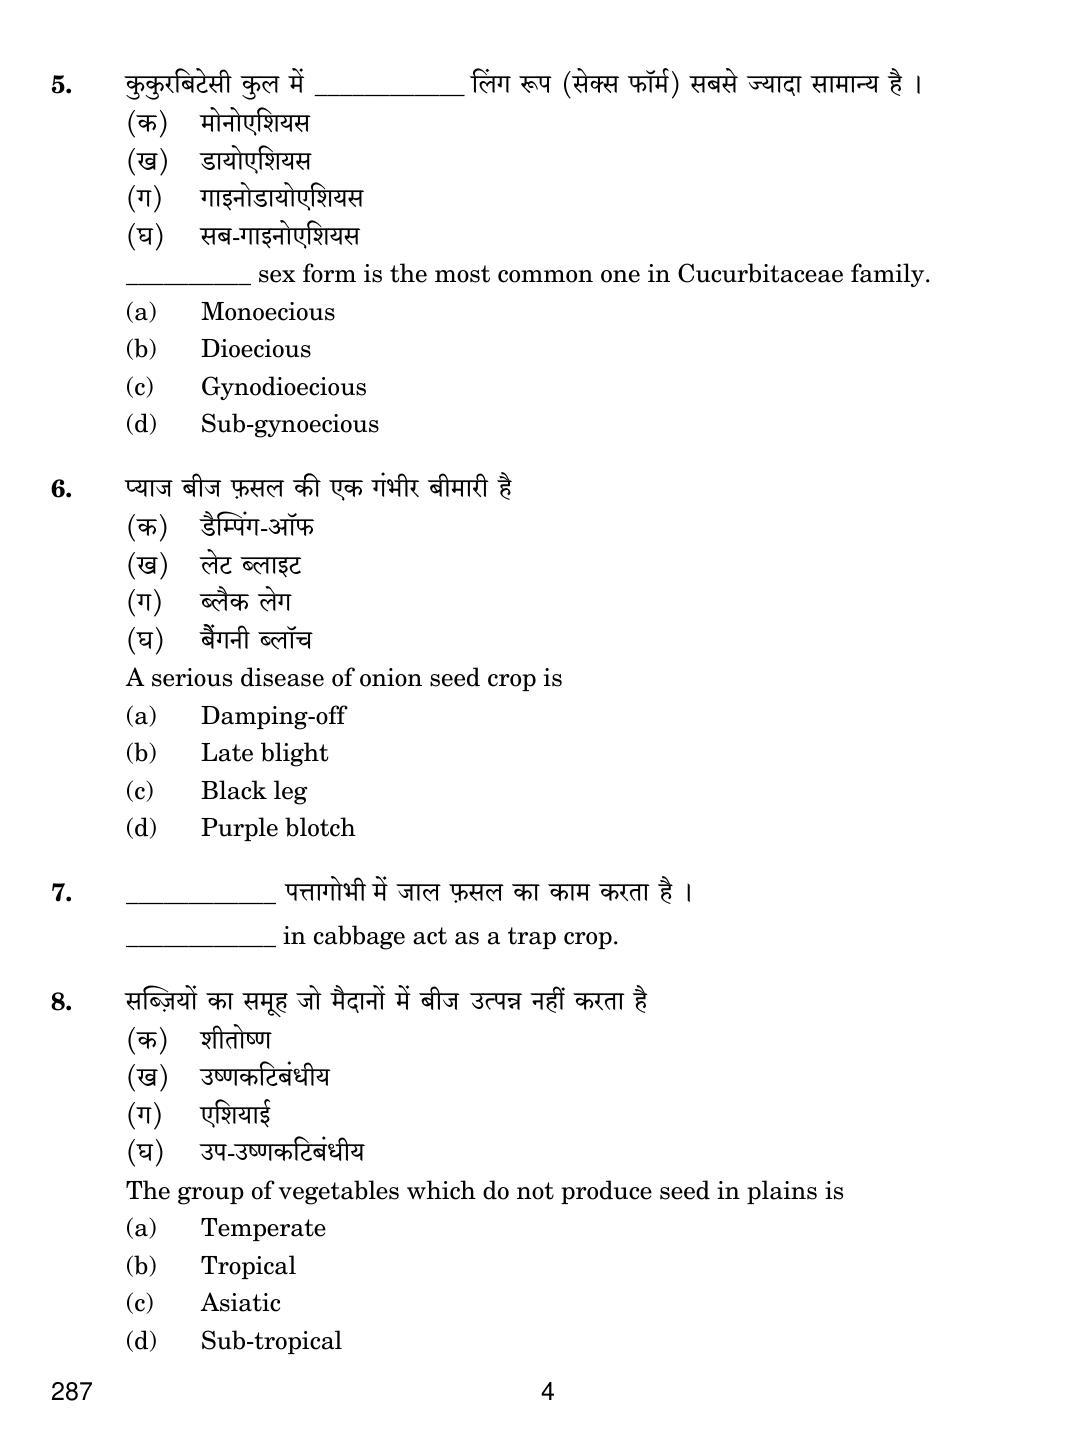 CBSE Class 12 287 Olericulture 2019 Question Paper - Page 4